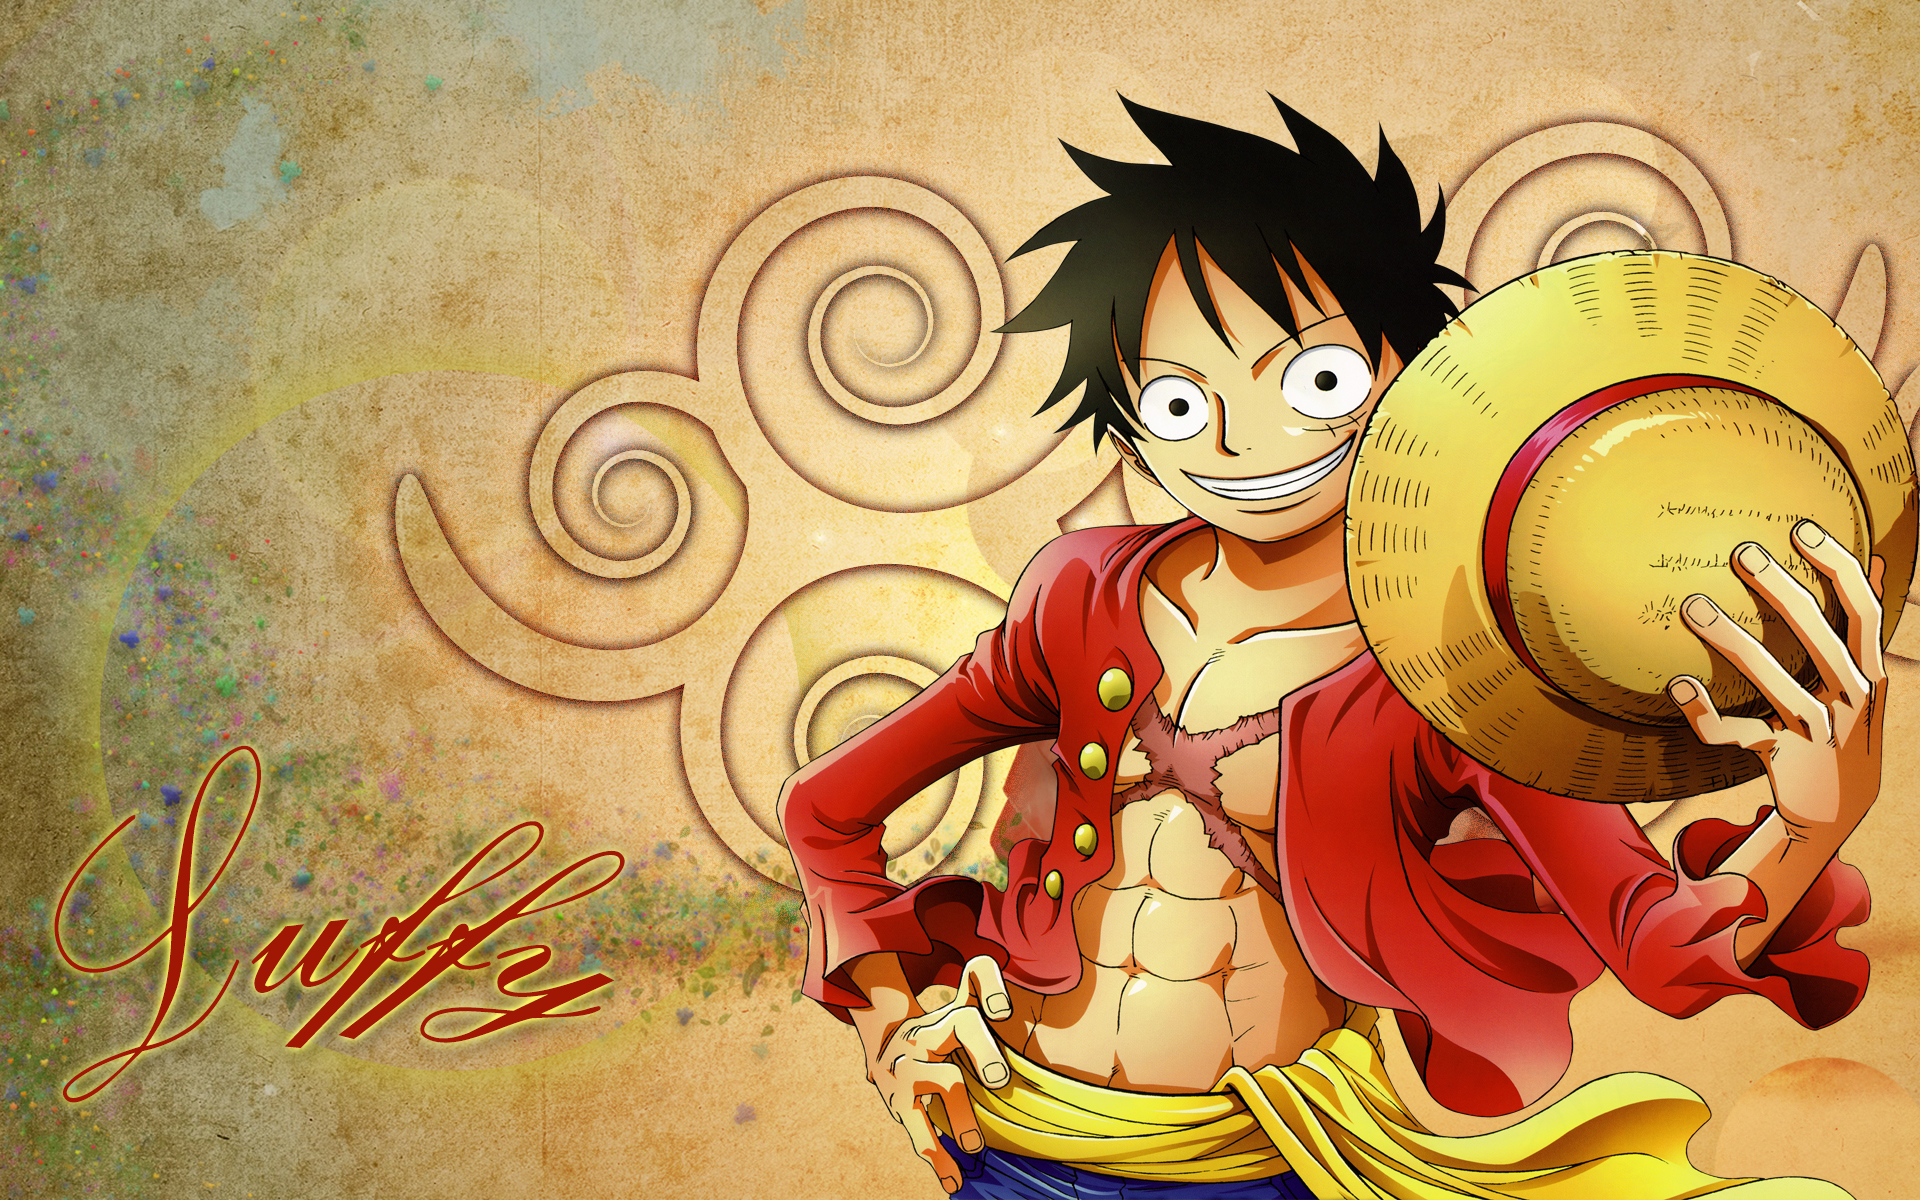 His smile attracts me  Cosplay de luffy One piece manga Monkey d luffy